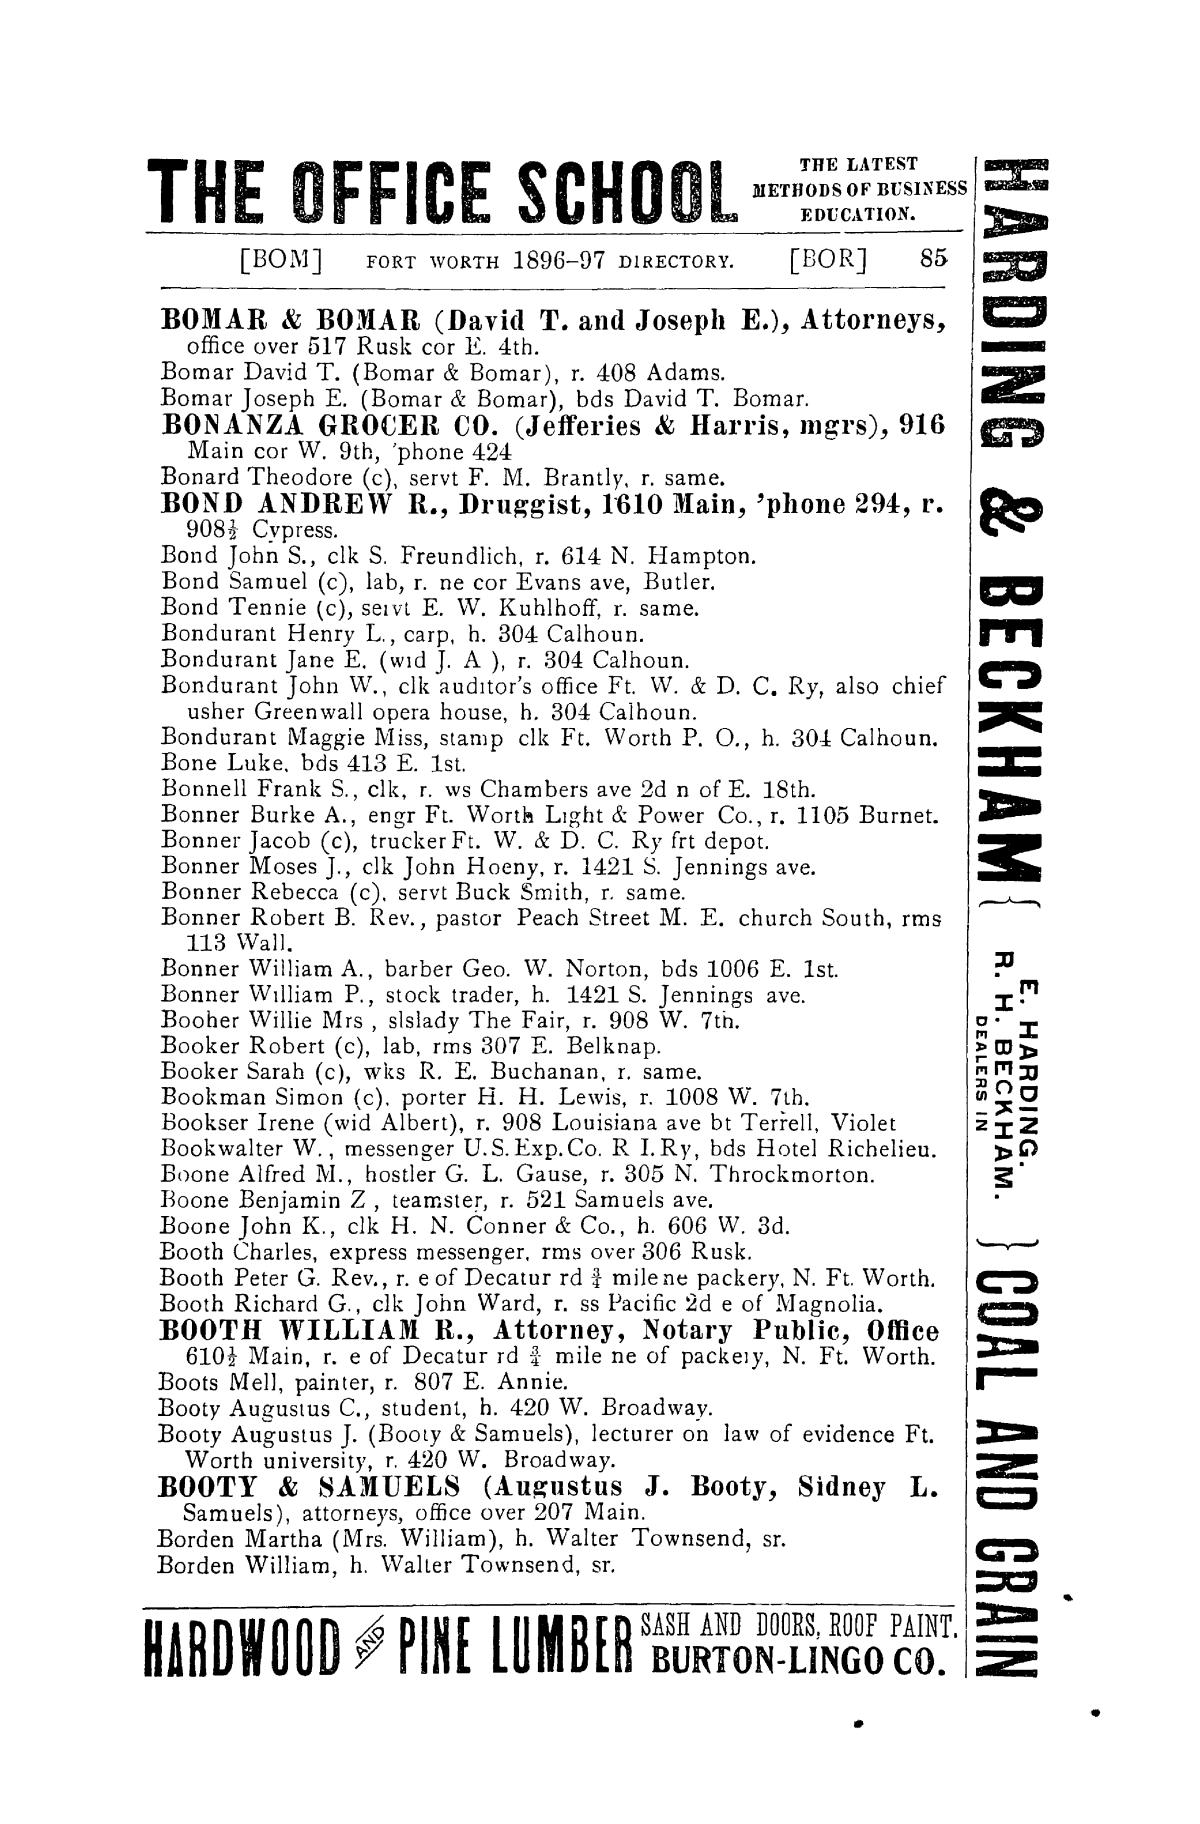 Morrison & Fourmy's general directory of the City of Fort Worth, 1896 - 1897
                                                
                                                    85
                                                